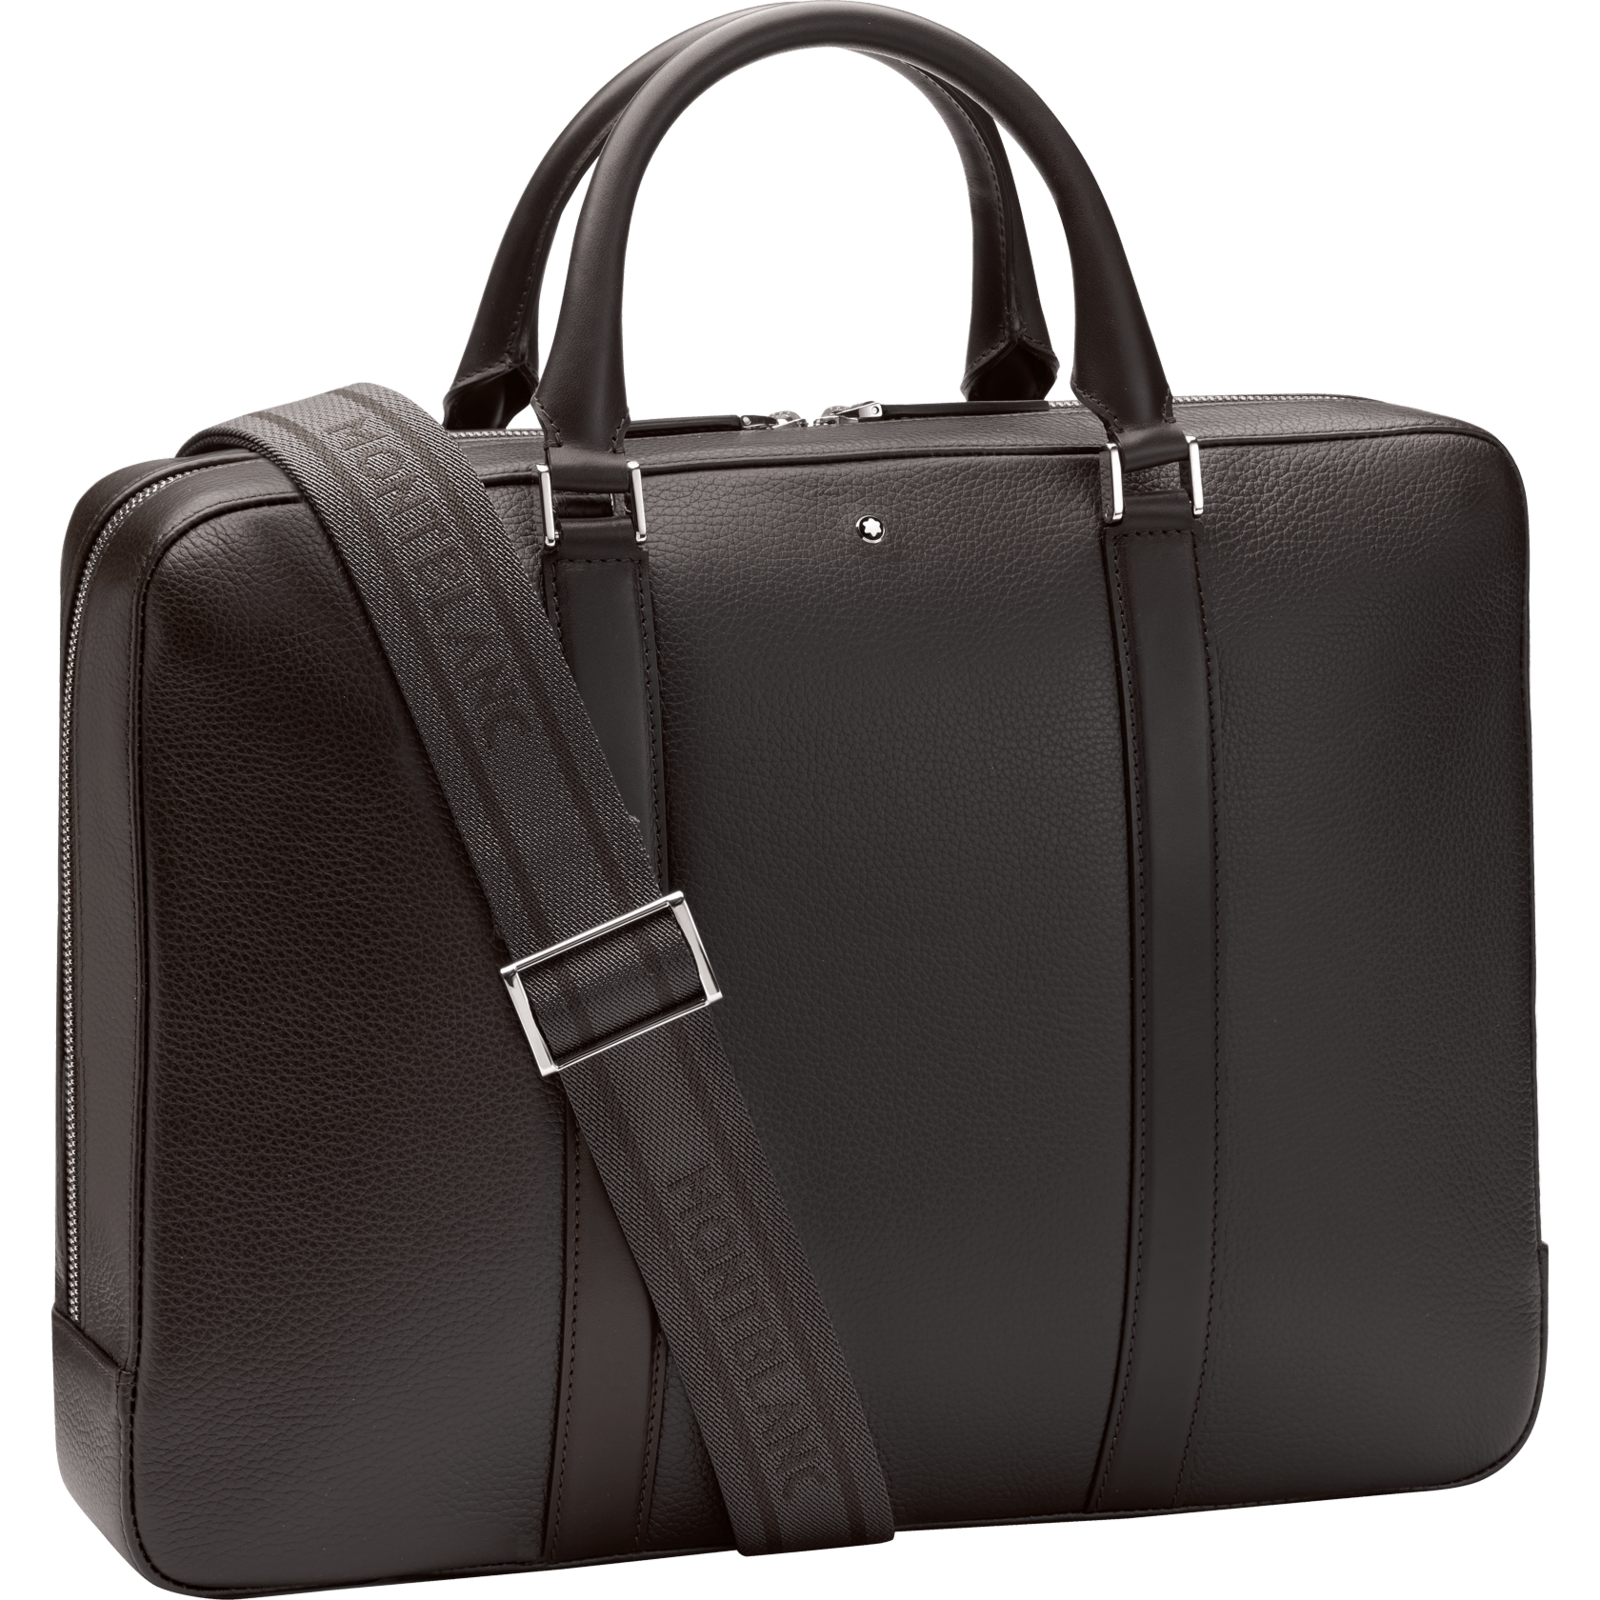 luggage clipart porter